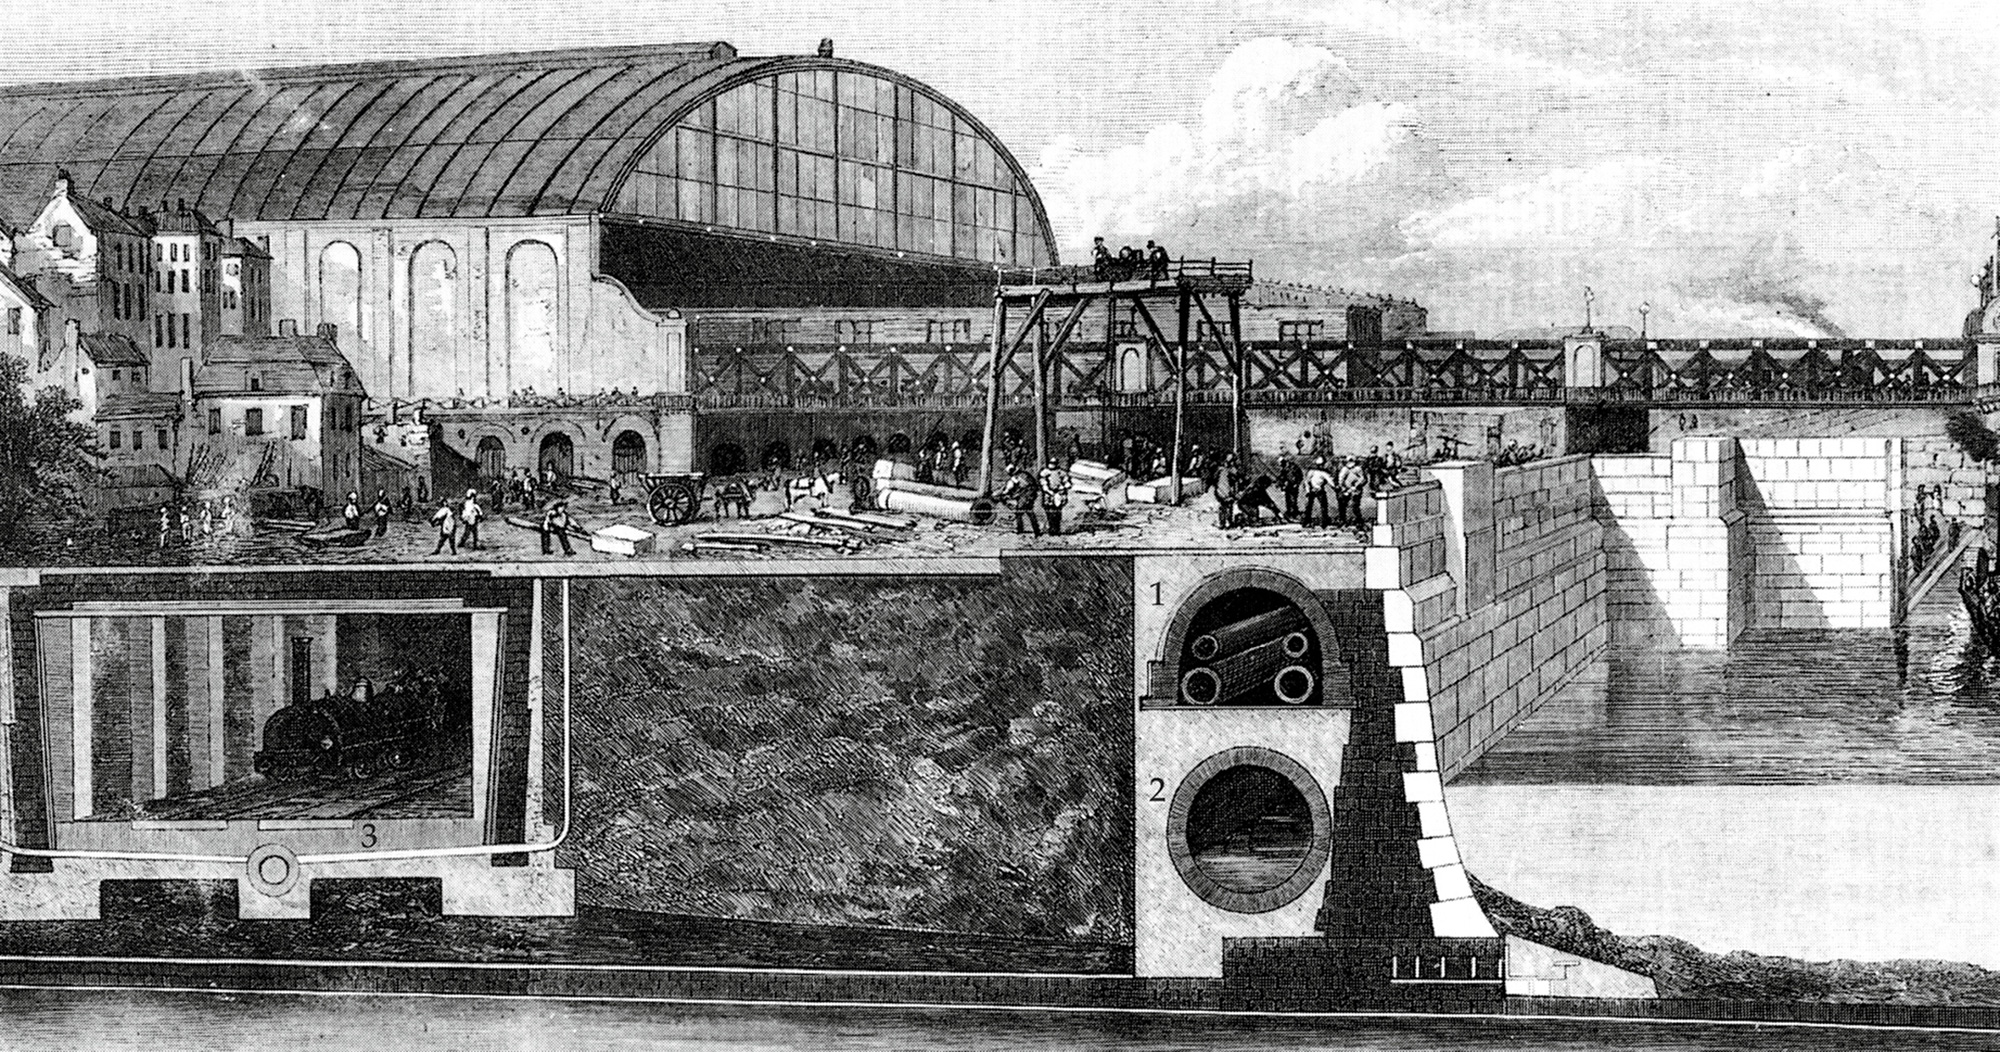 Section view of the Thames Embankment depicting London’s underground infrastructure. The tunnel for the Metropolitan District Railway is at left (3); Joseph Bazalgette’s sewer system (2) runs beneath the “subway,” a horizontal shaftway built to house gas and water pipes (1). From the Illustrated London News, 22 June 1867.